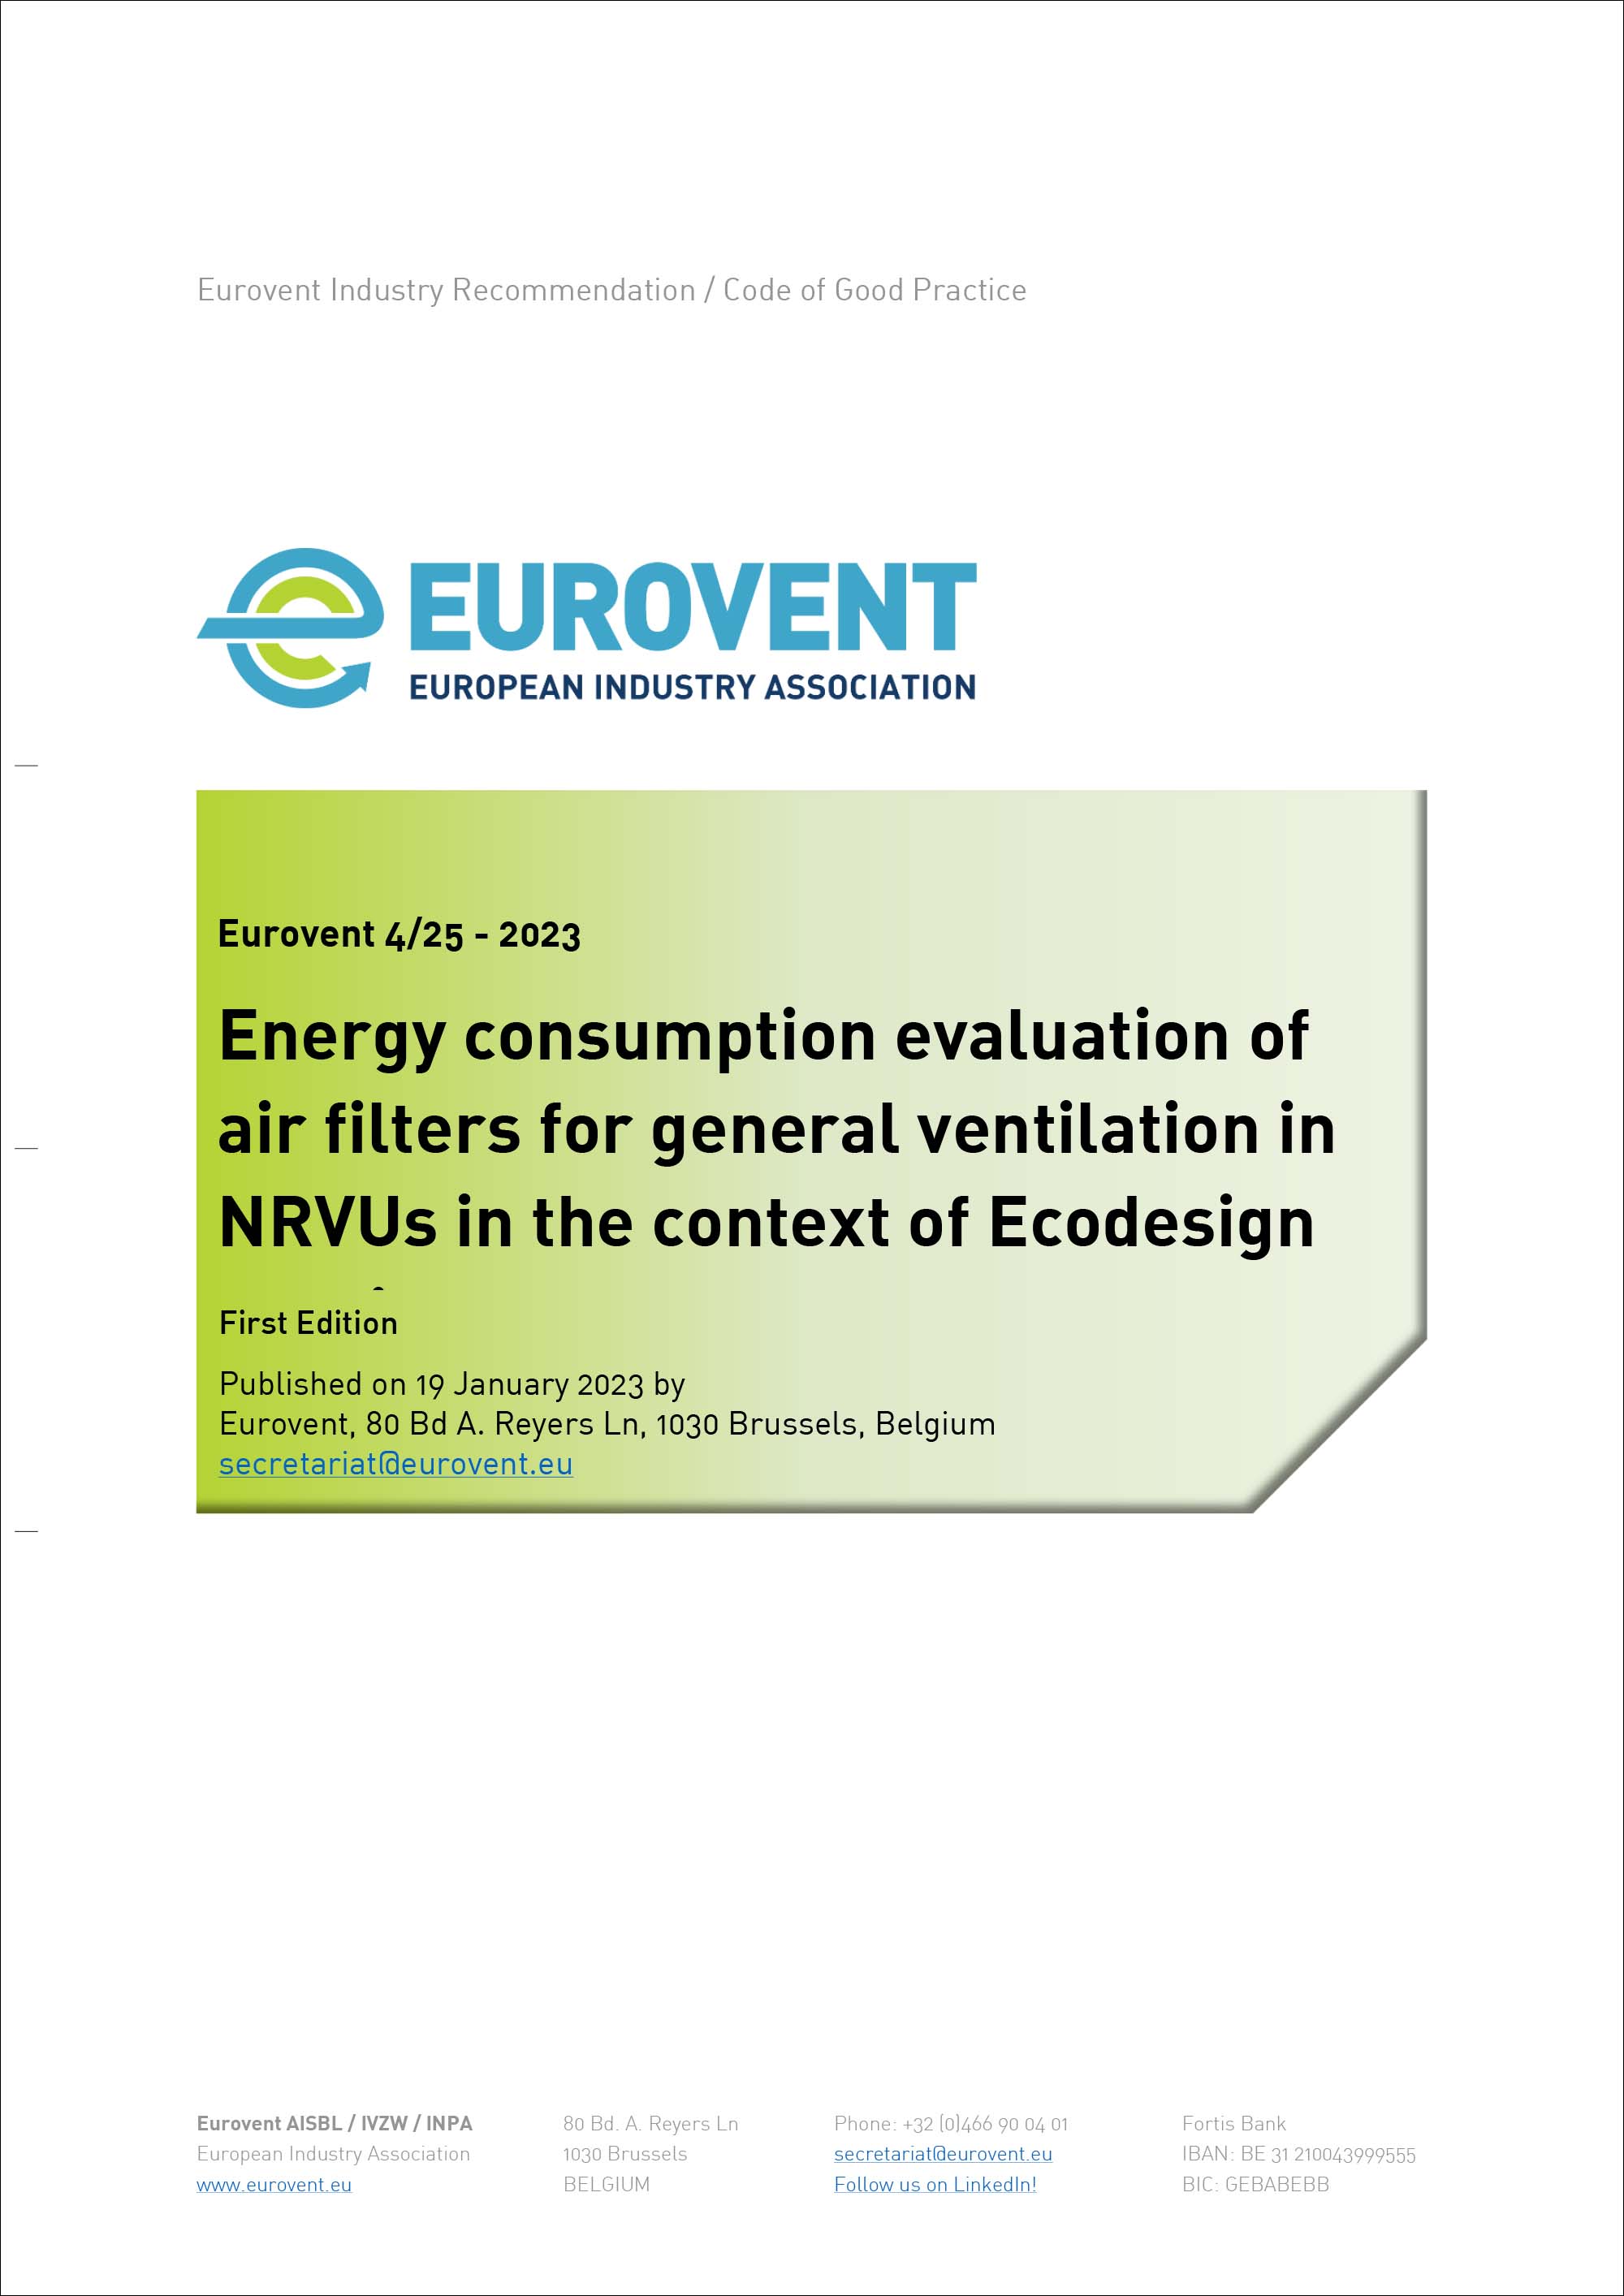 Eurovent 4/25 - 2023: Energy consumption evaluation of air filters for general ventilation in NRVUs in the context of Ecodesign requirements - First Edition - English